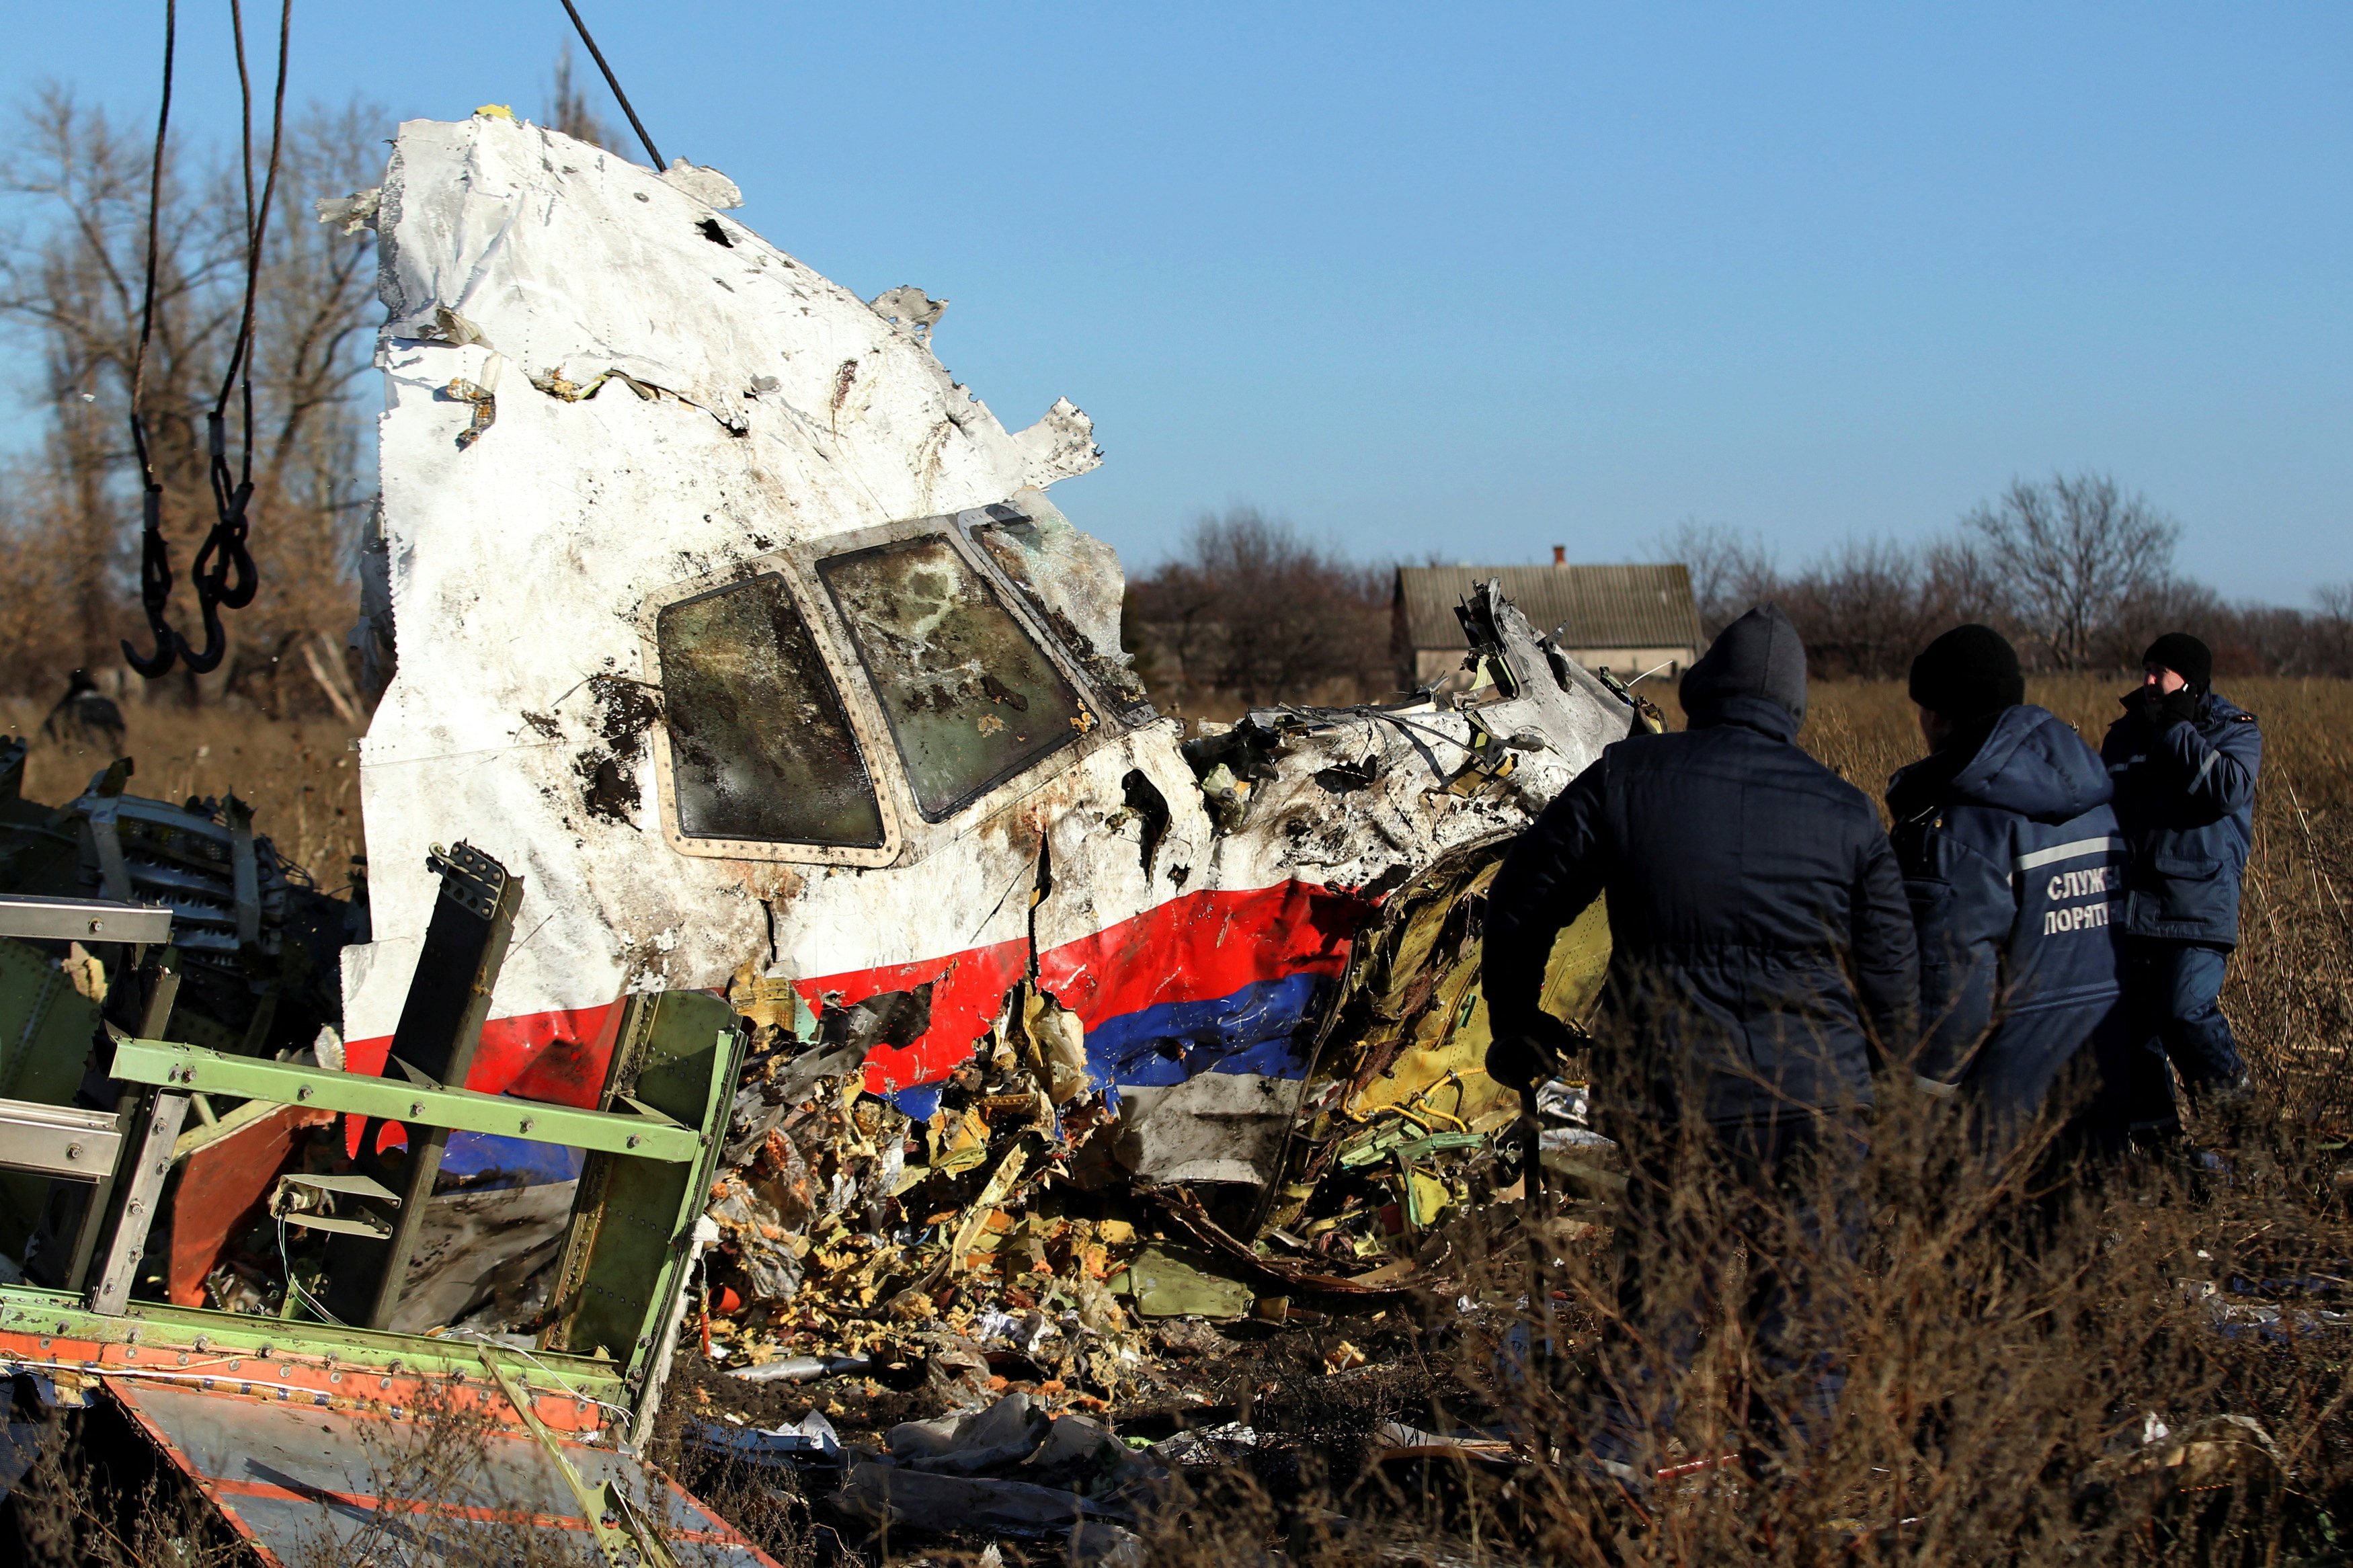 Wreckage from Malaysia Airlines flight MH17 at the site of the plane crash in the Donetsk region, Ukraine in 2014. Photo: Reuters